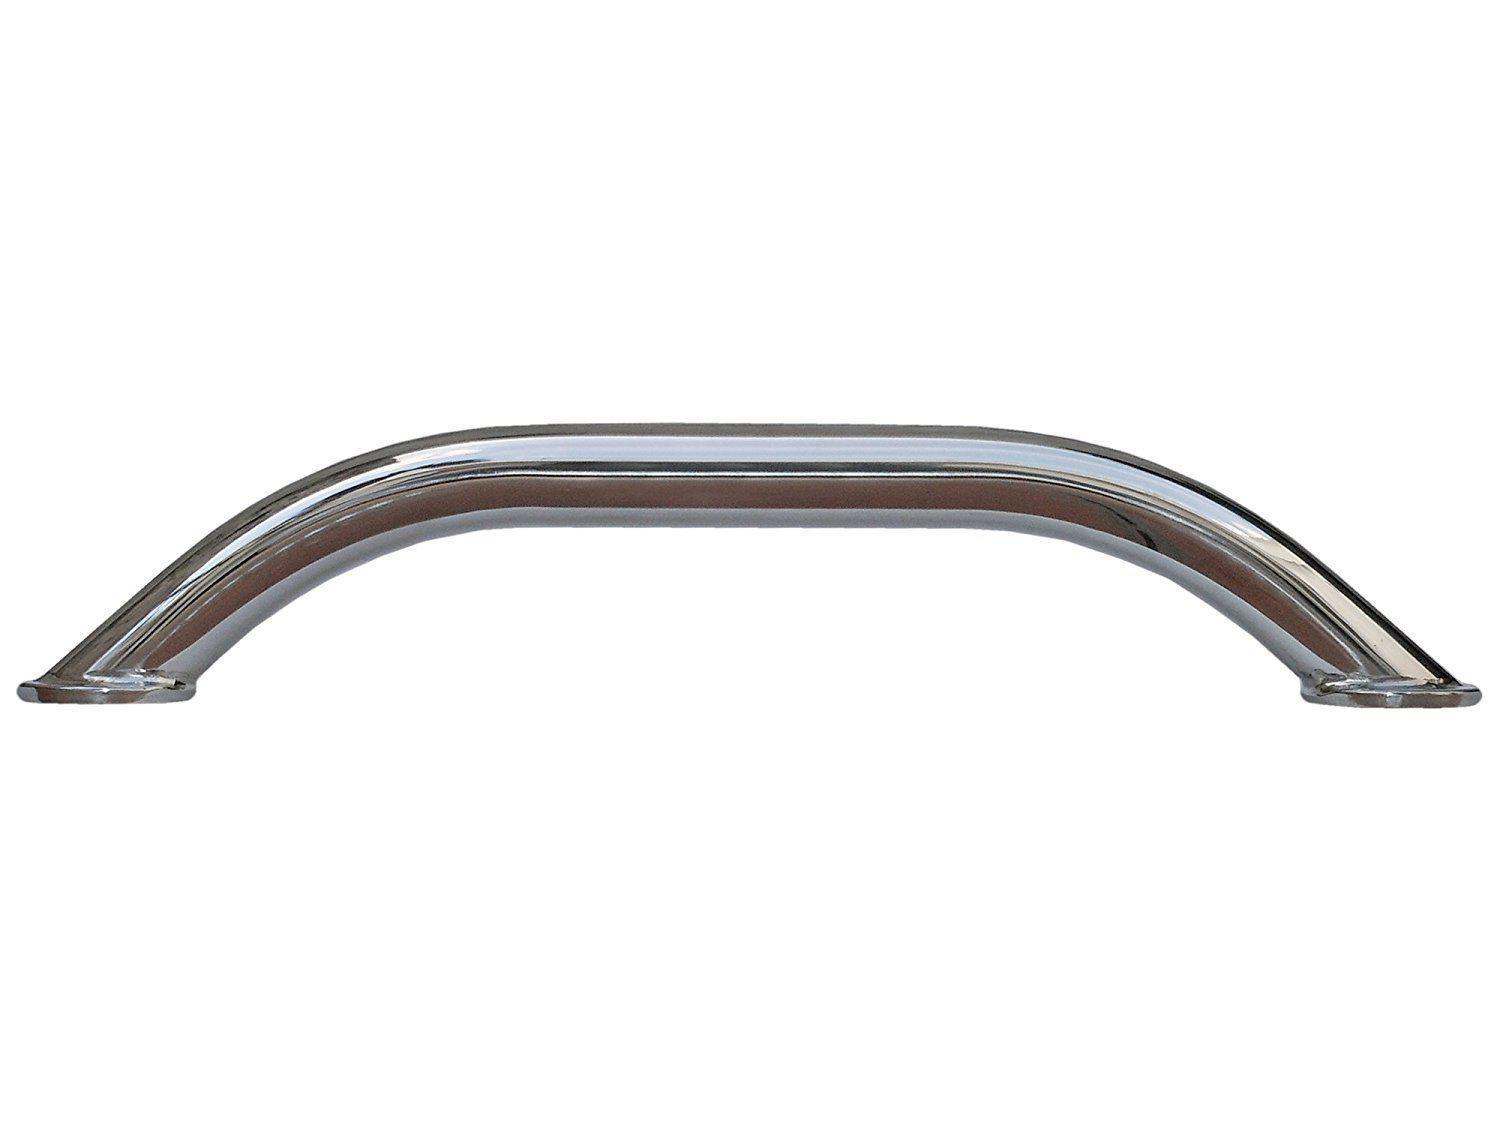 Marine Grab Handle Handrail | Polished Stainless Steel Construction | 12 inches-Canadian Marine &amp; Outdoor Equipment